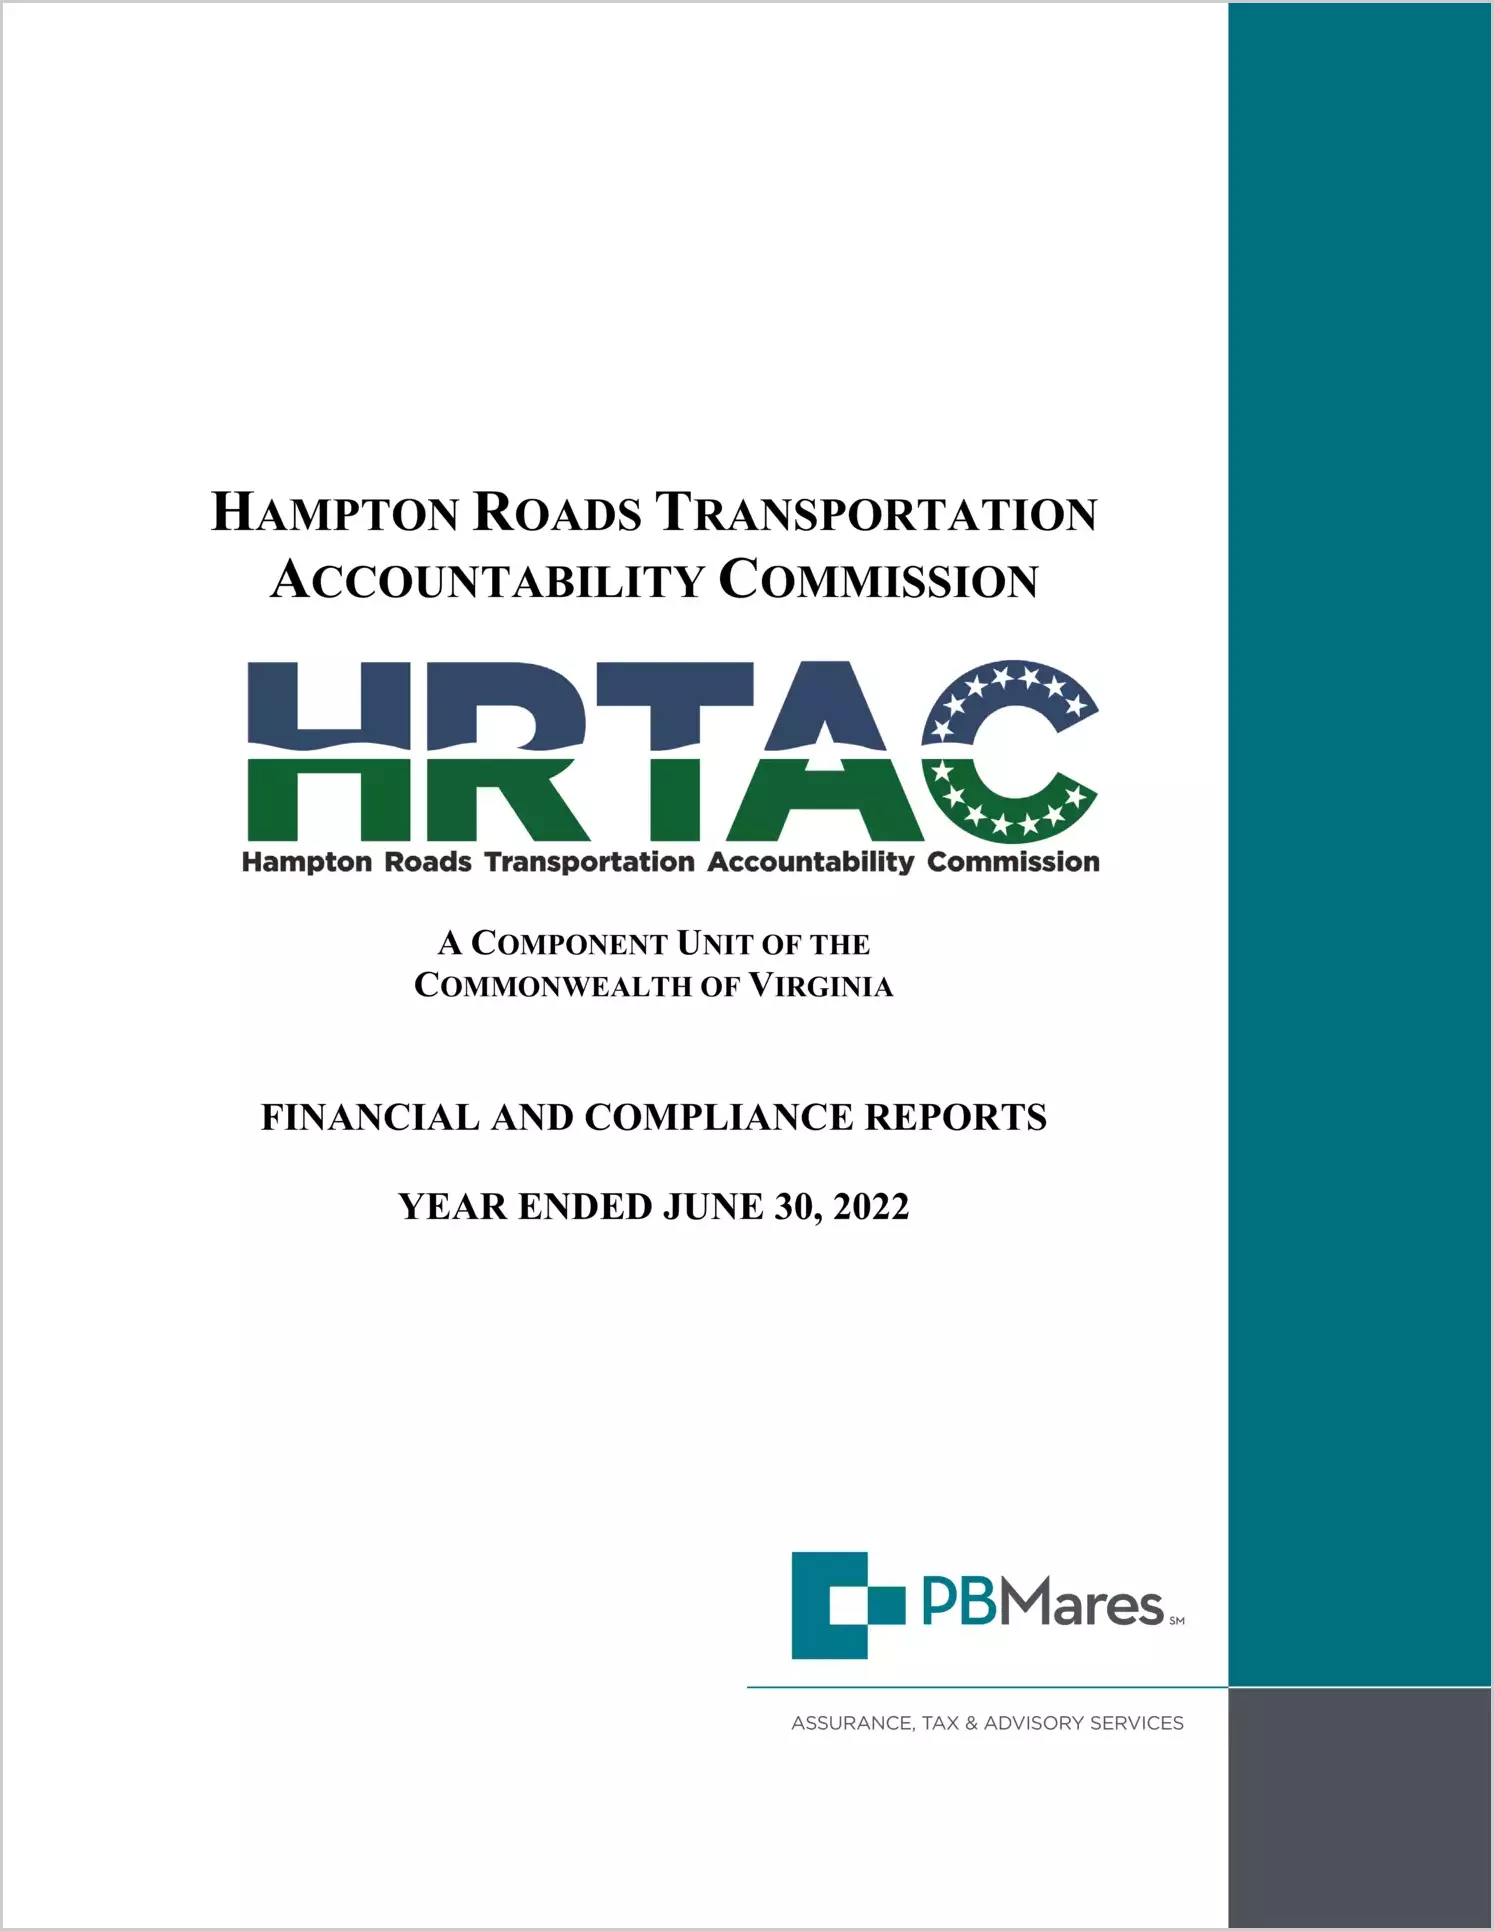 Hampton Roads Transportation Accountability Commission for the year ended June 30, 2022